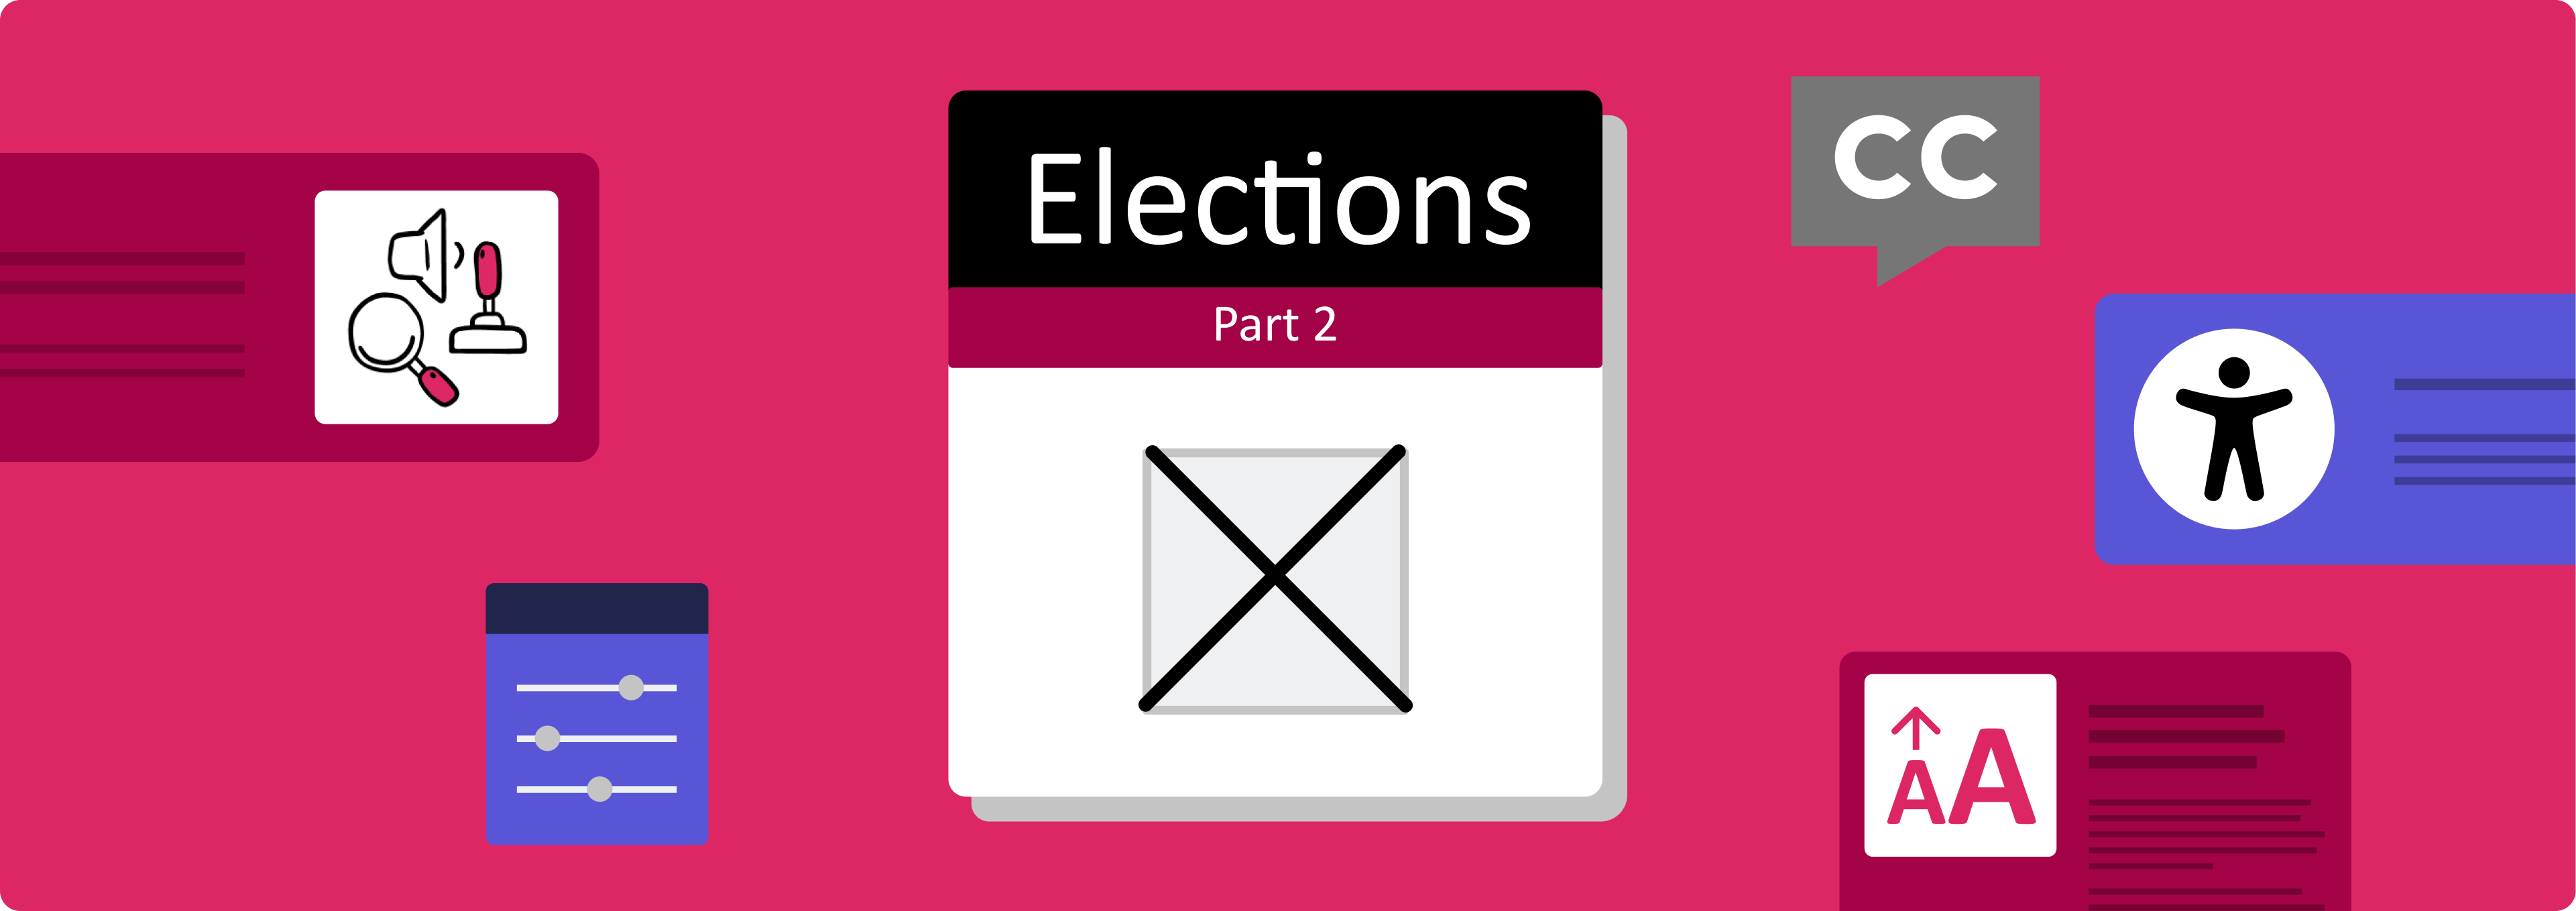 Decorative banner image that says 'Elections Part 2' with illustrations of a checked off ballot checkbox, surrounded by smaller illustrations of accessibility features such as a closed captioning symbol, text resizing, and other assistive technologies